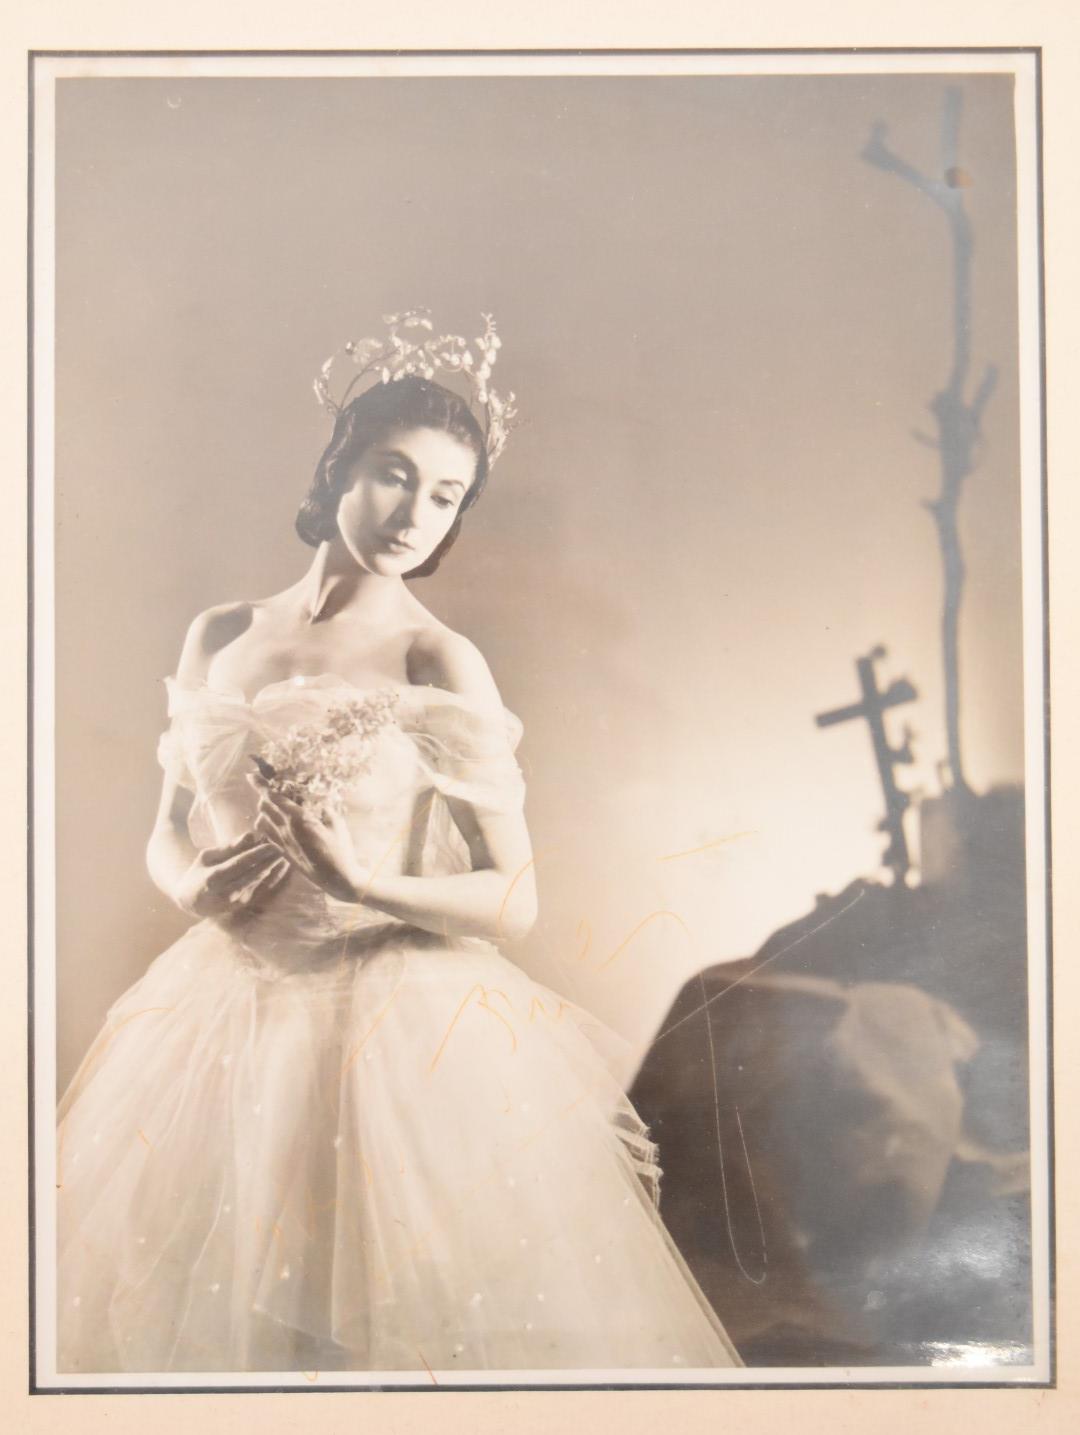 Margot Fonteyn signed photograph together with Danny Kaye example - Image 3 of 4